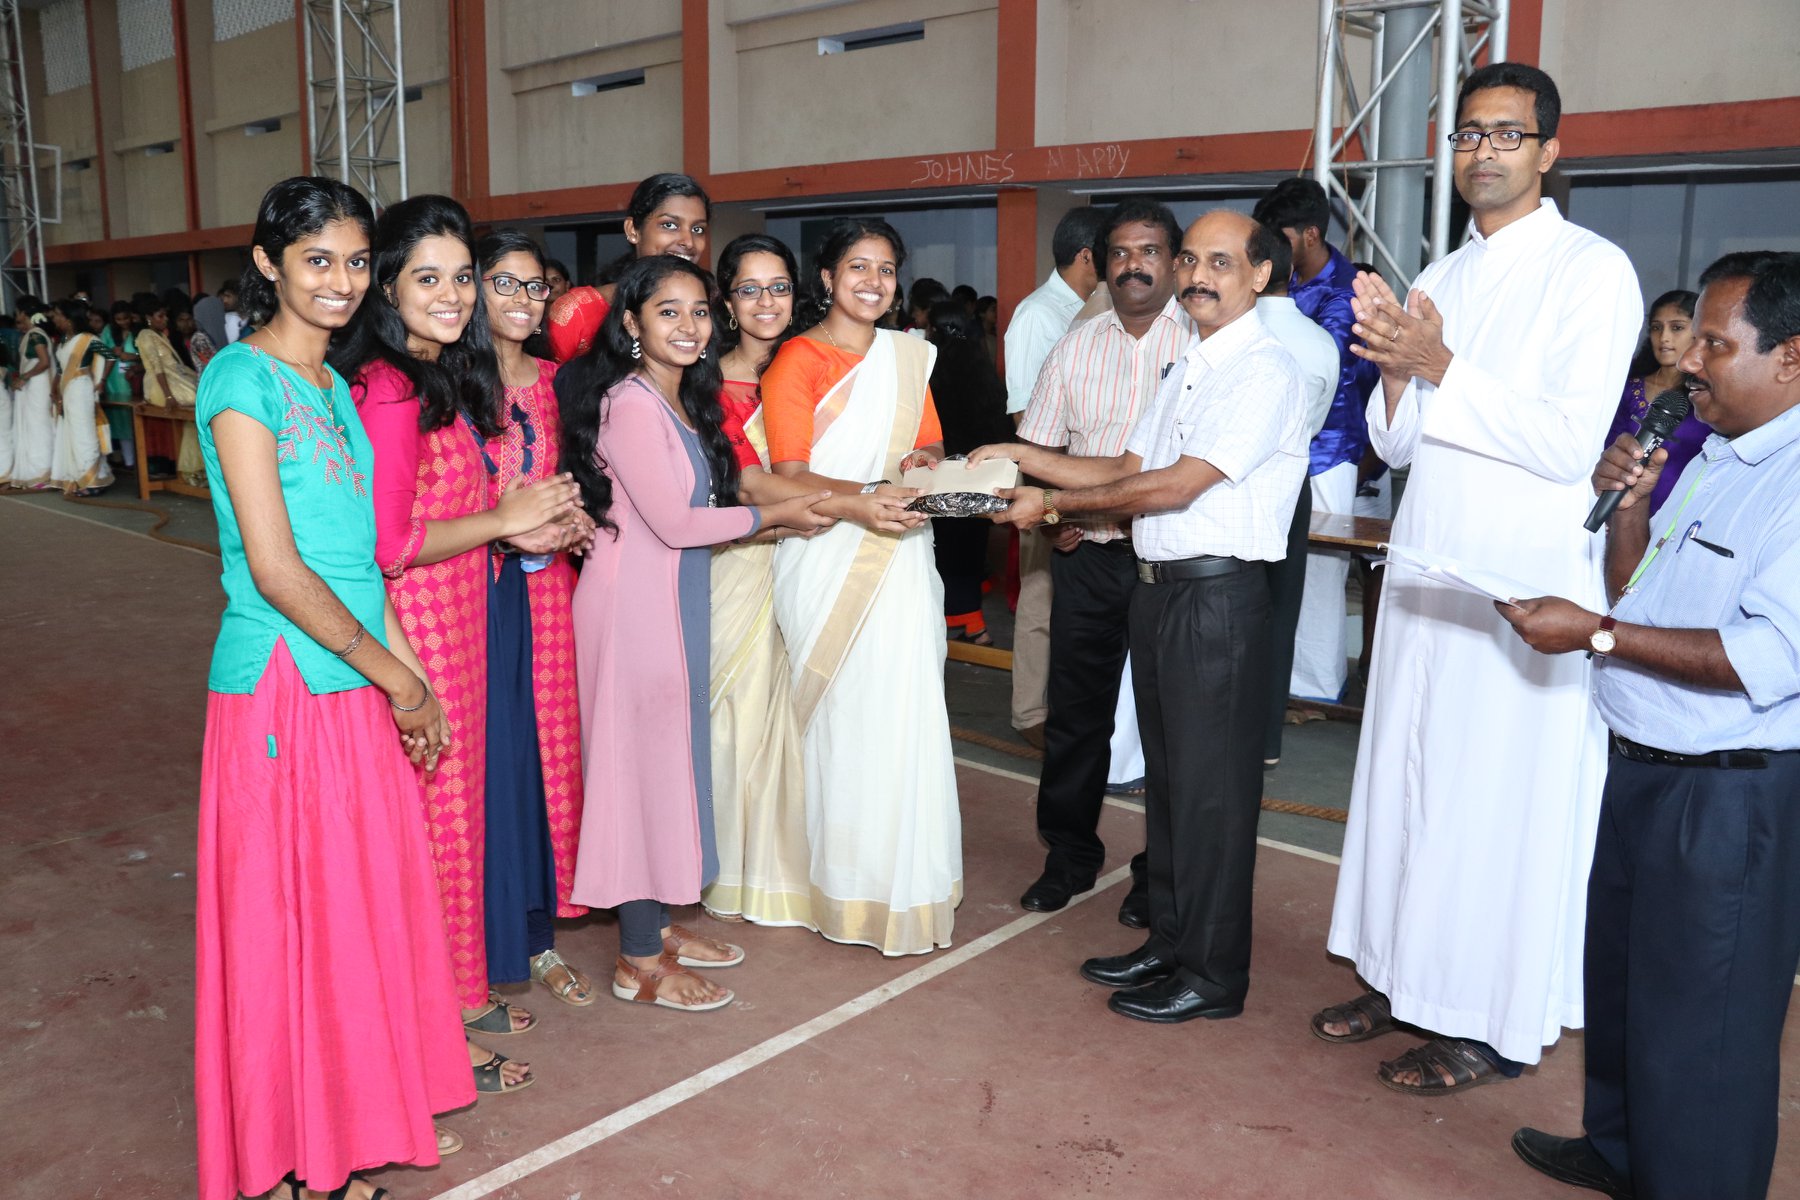 St-George-s-College-Aruvithura